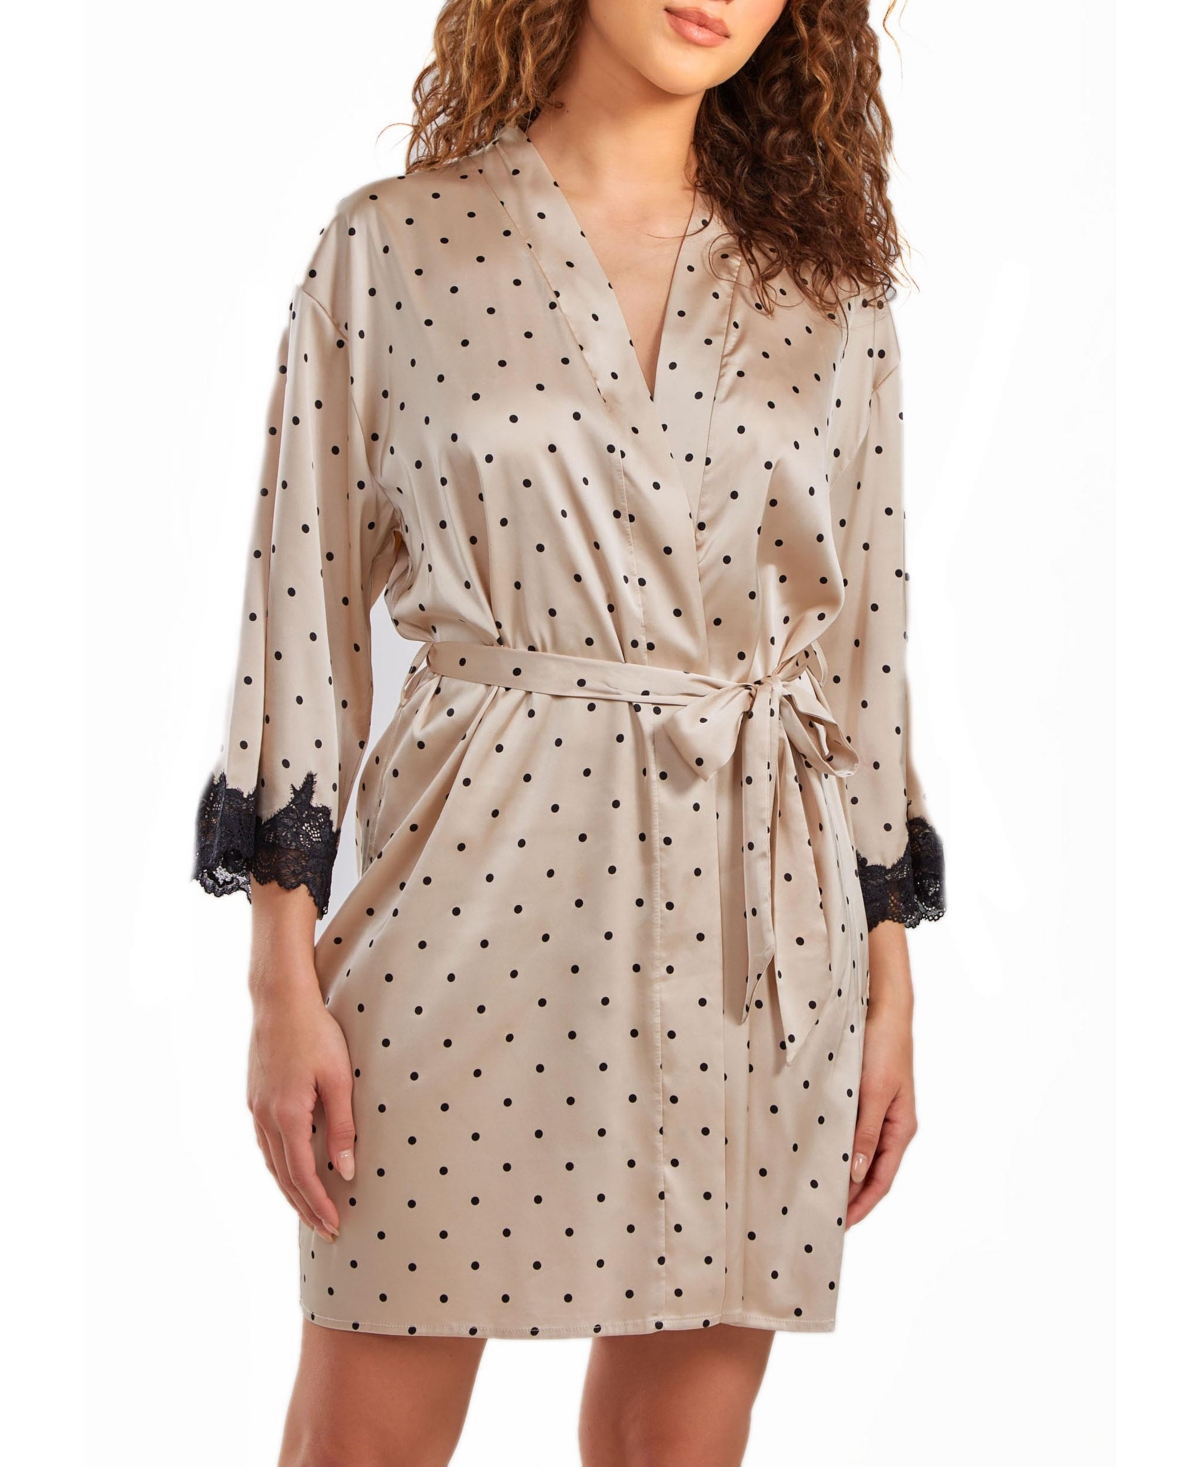 Icollection Kareen Plus Size Dotted Satin Robe With Lace Trimmed Sleeves And Self Tie Sash In Beige